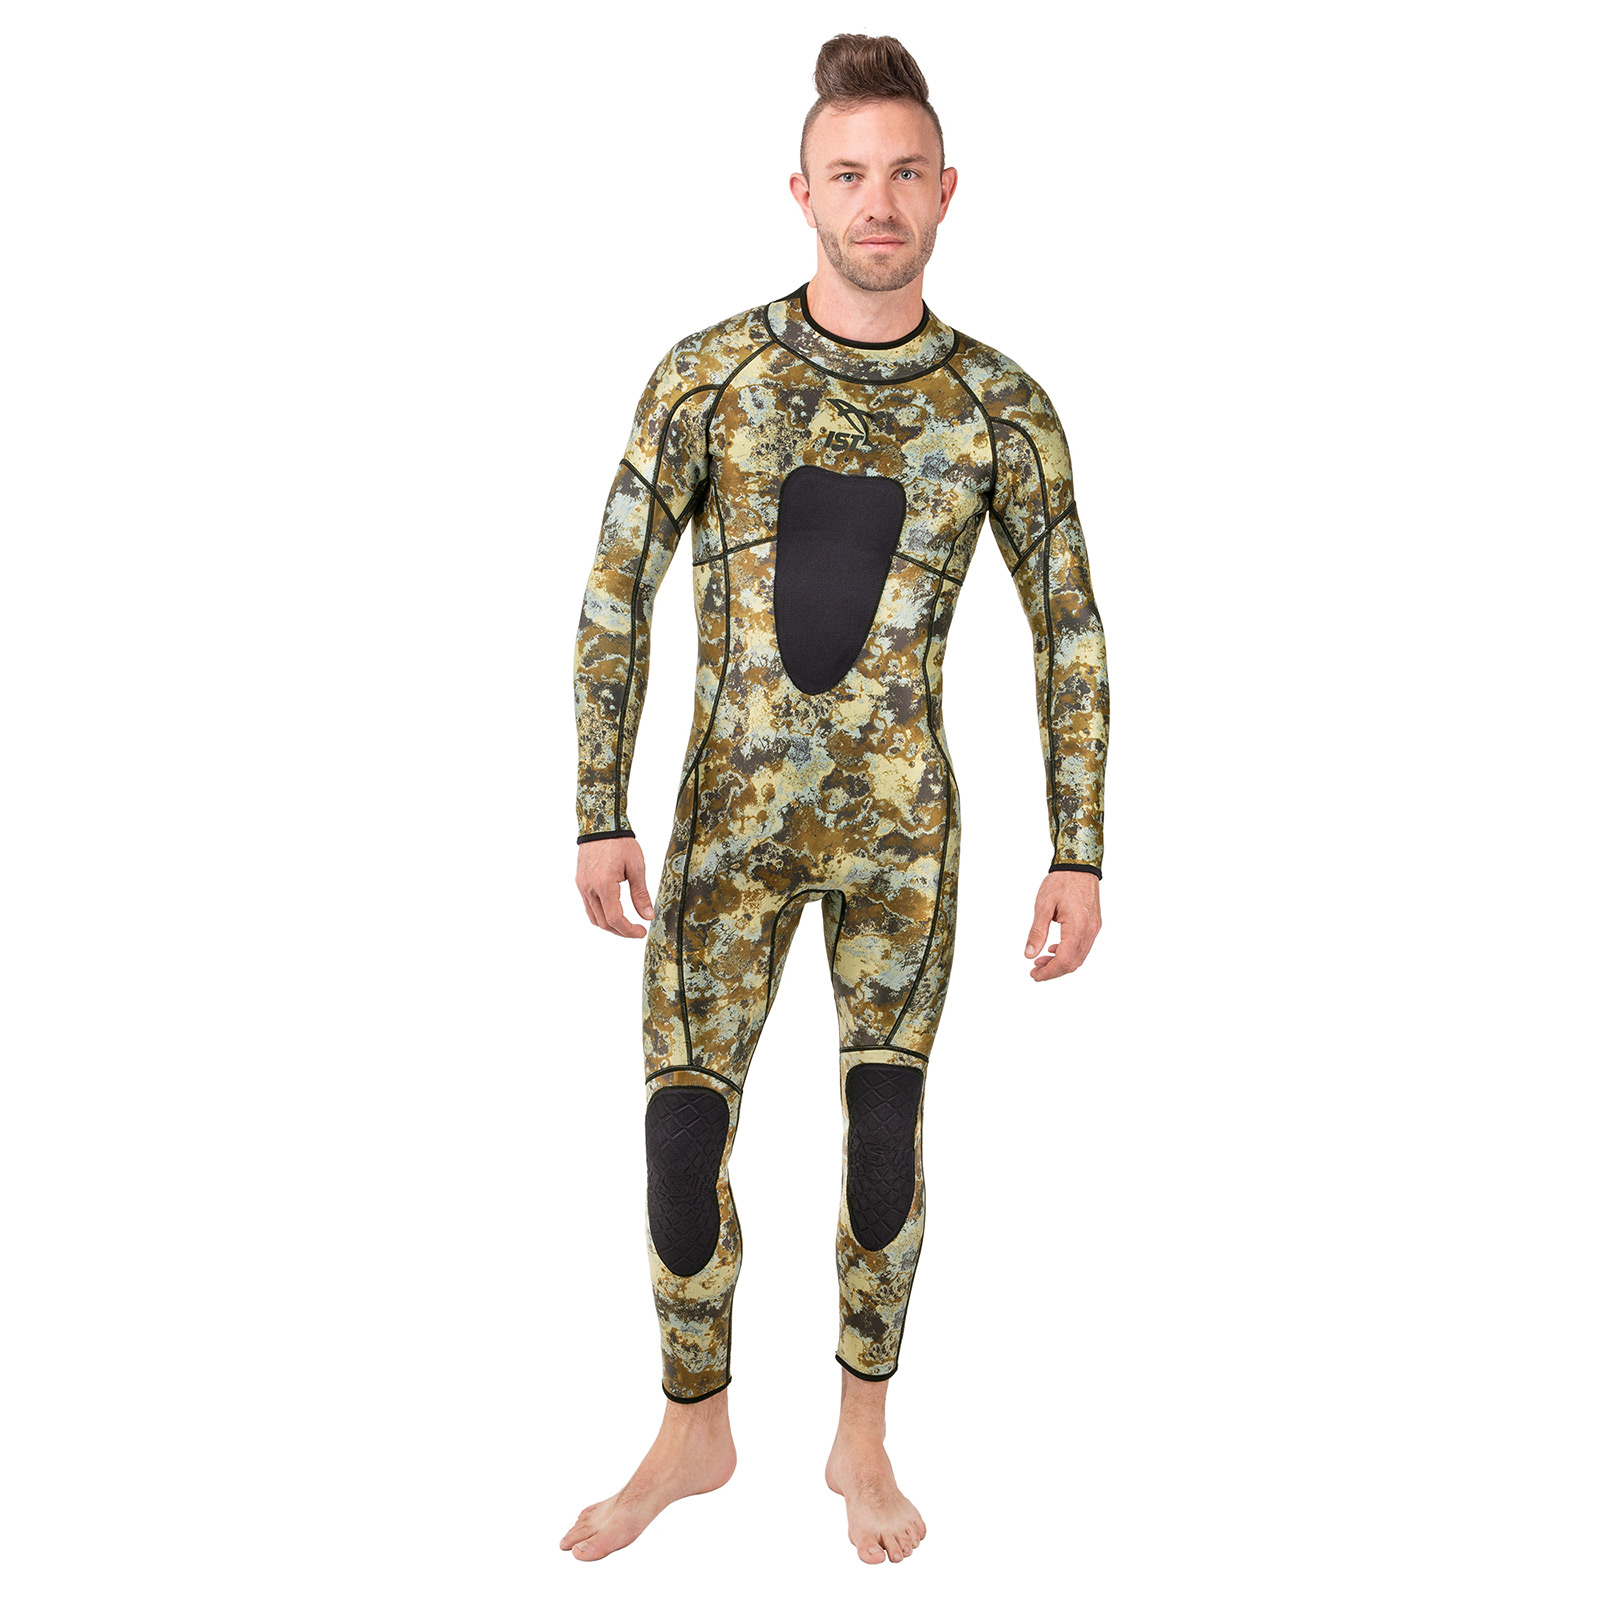 PURIGUARD 3MM CAMO JUMPSUIT FOR HUNTING IN WARM WATER